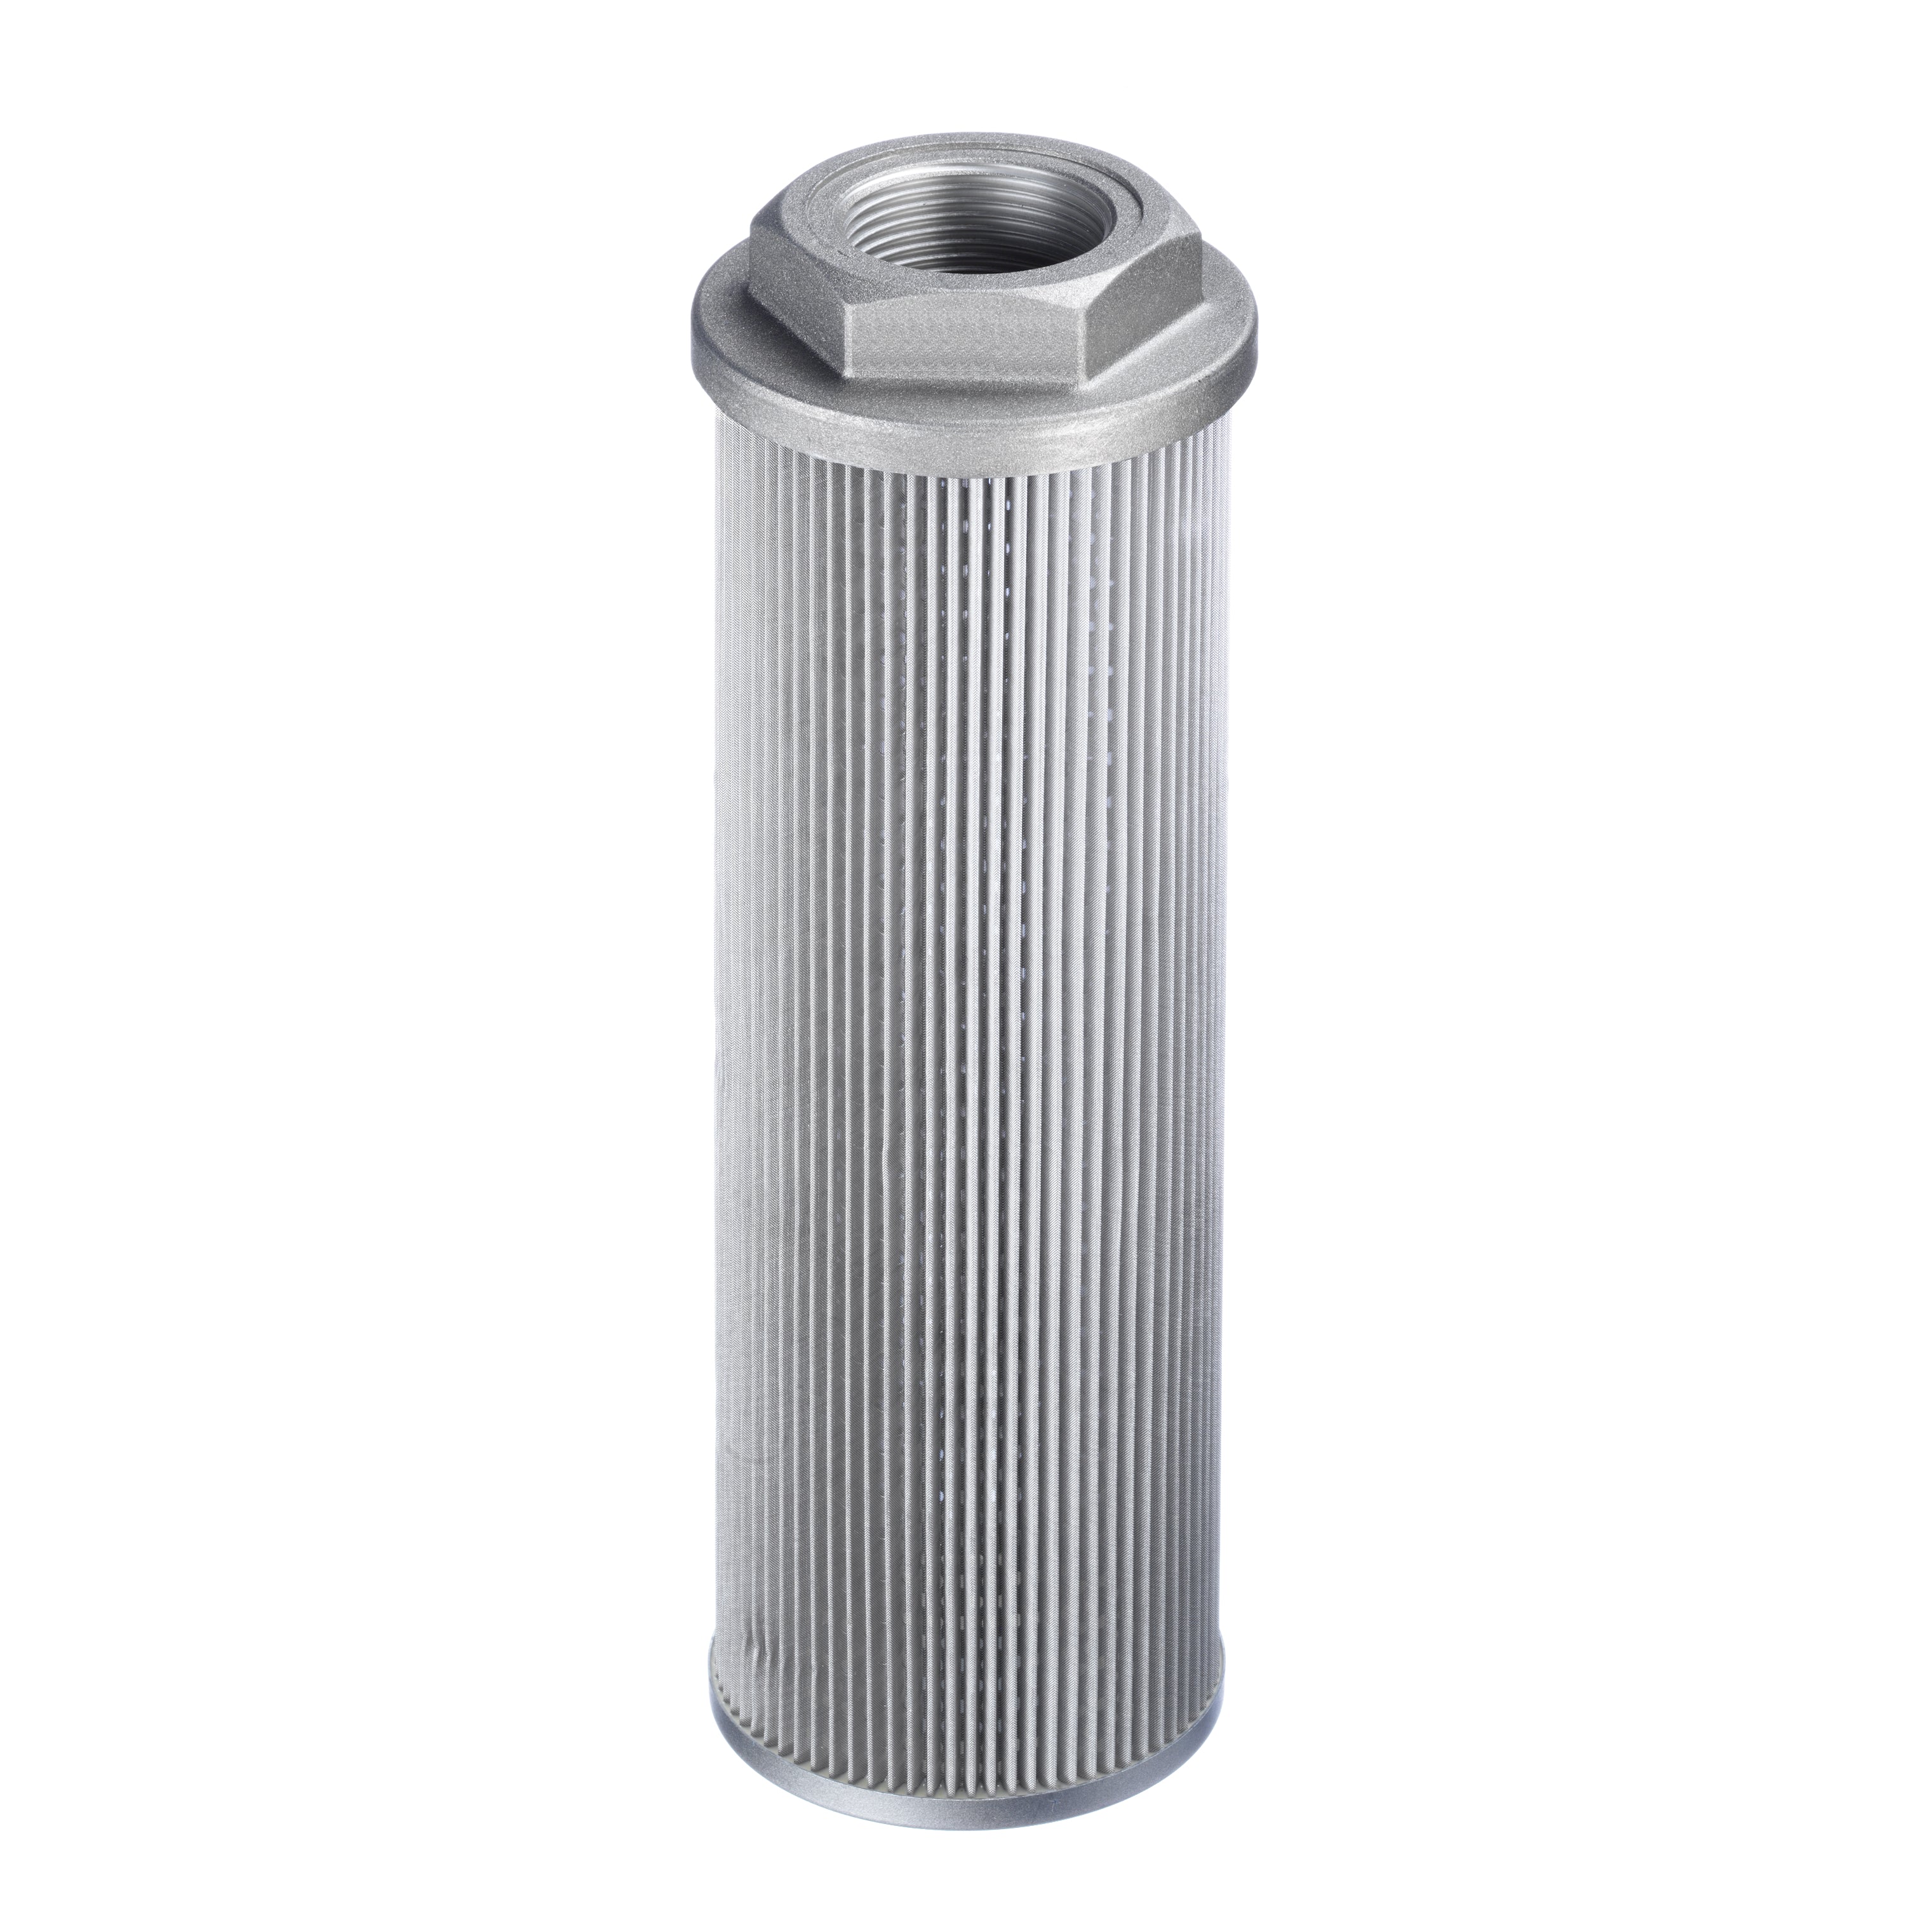 SUS-150-N40-213-125-A-O : Stauff Suction Strainer, Aluminum End Cap, 2.5" NPT, 88.4GPM, 125 Micron, No Bypass